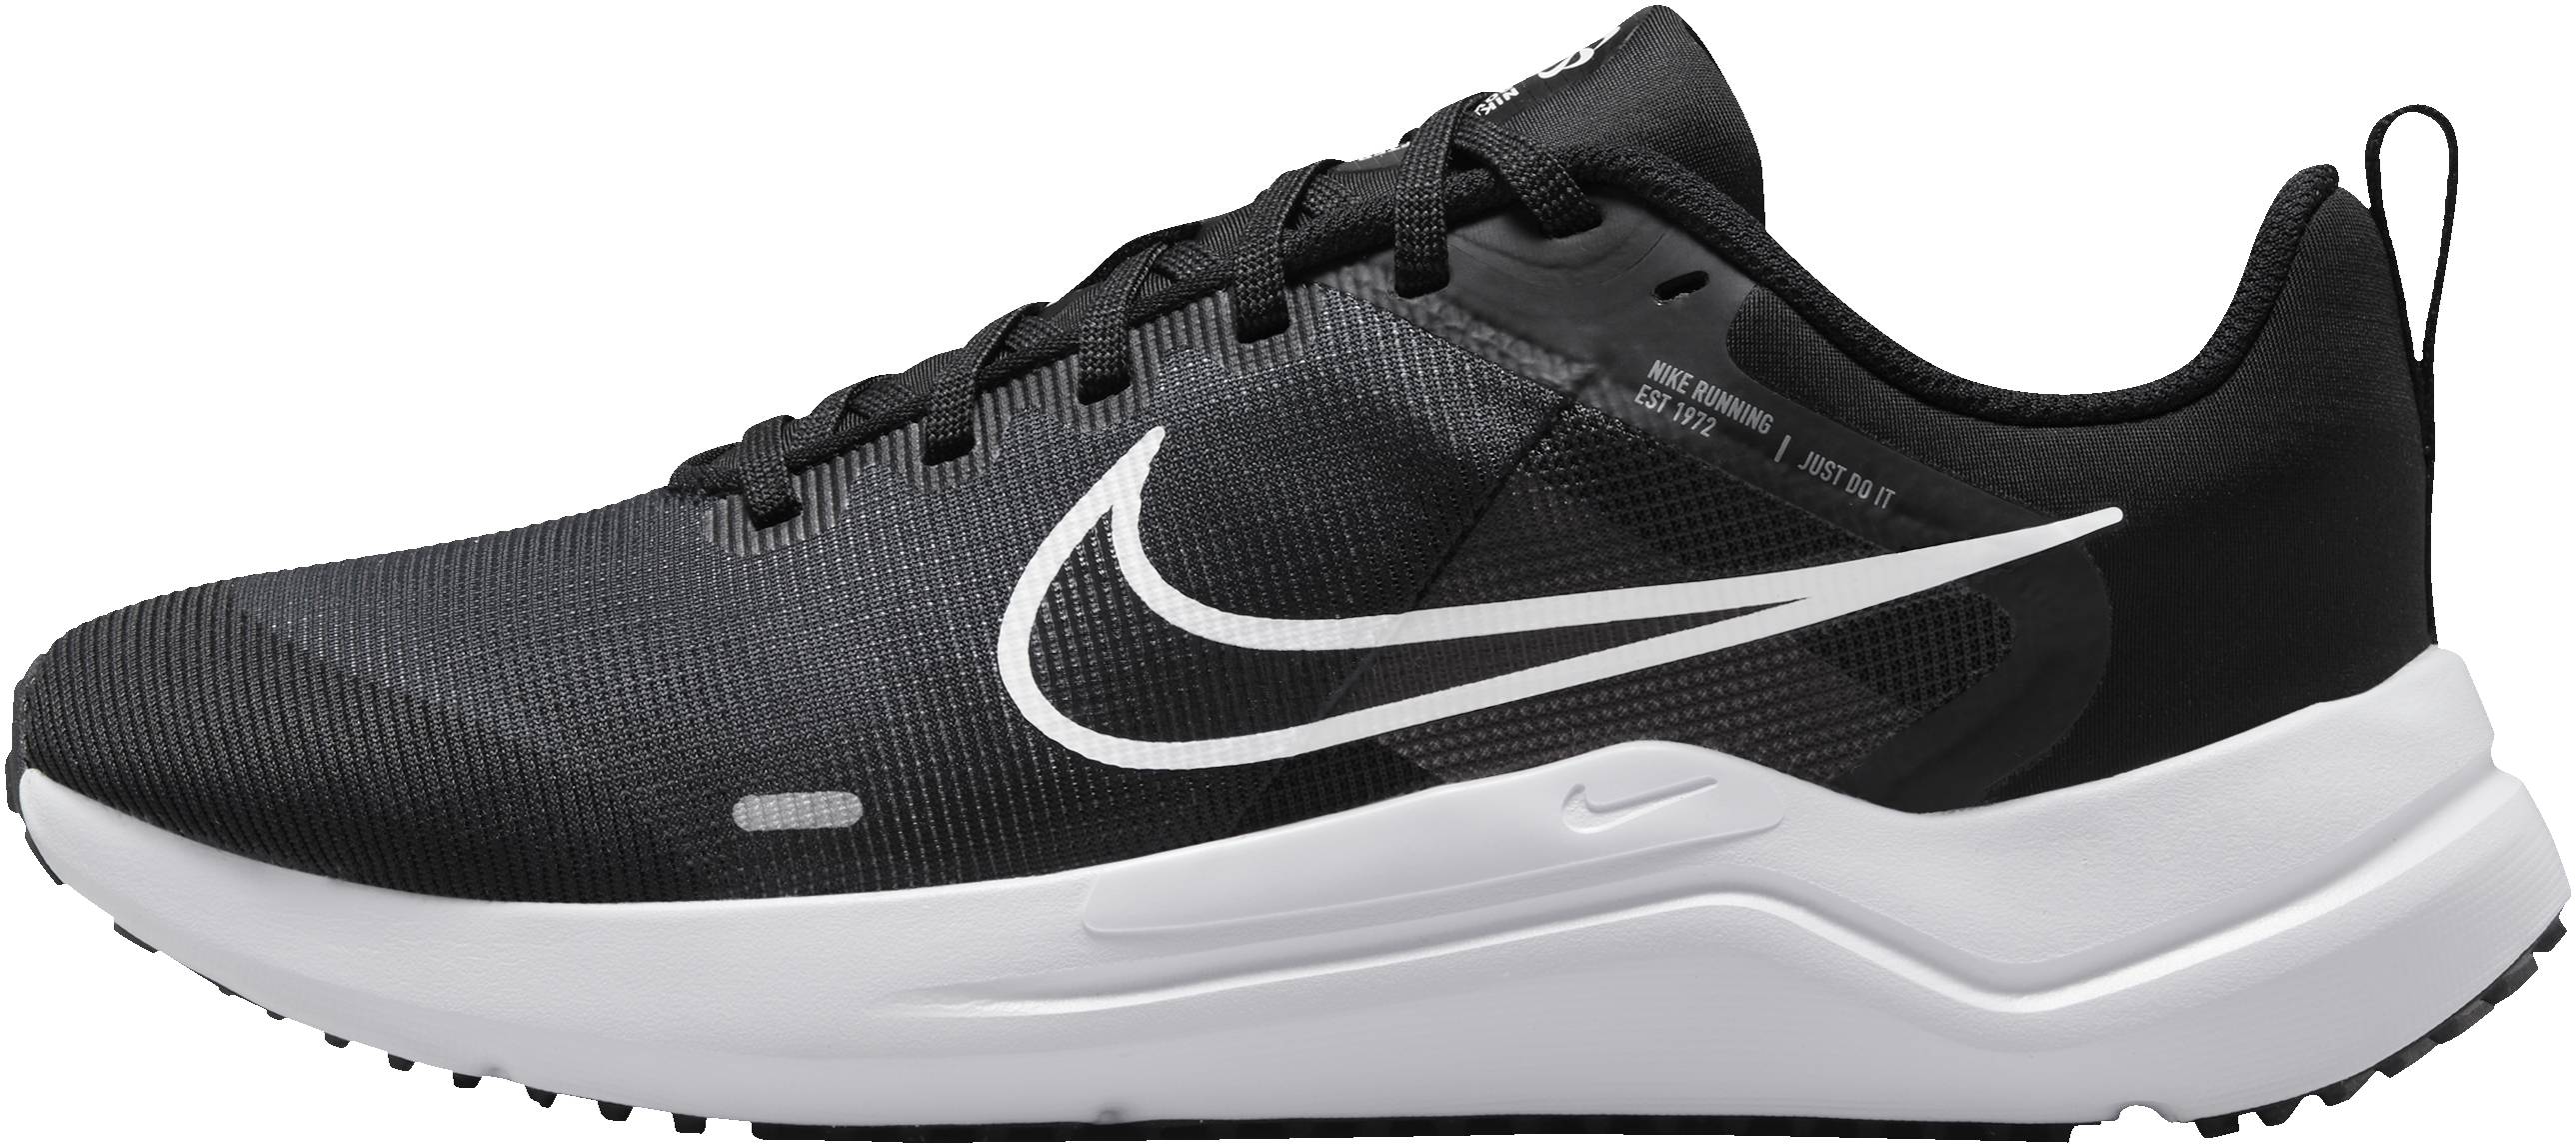 10+ Wide Nike shoes: Save up to 24% | RunRepeat